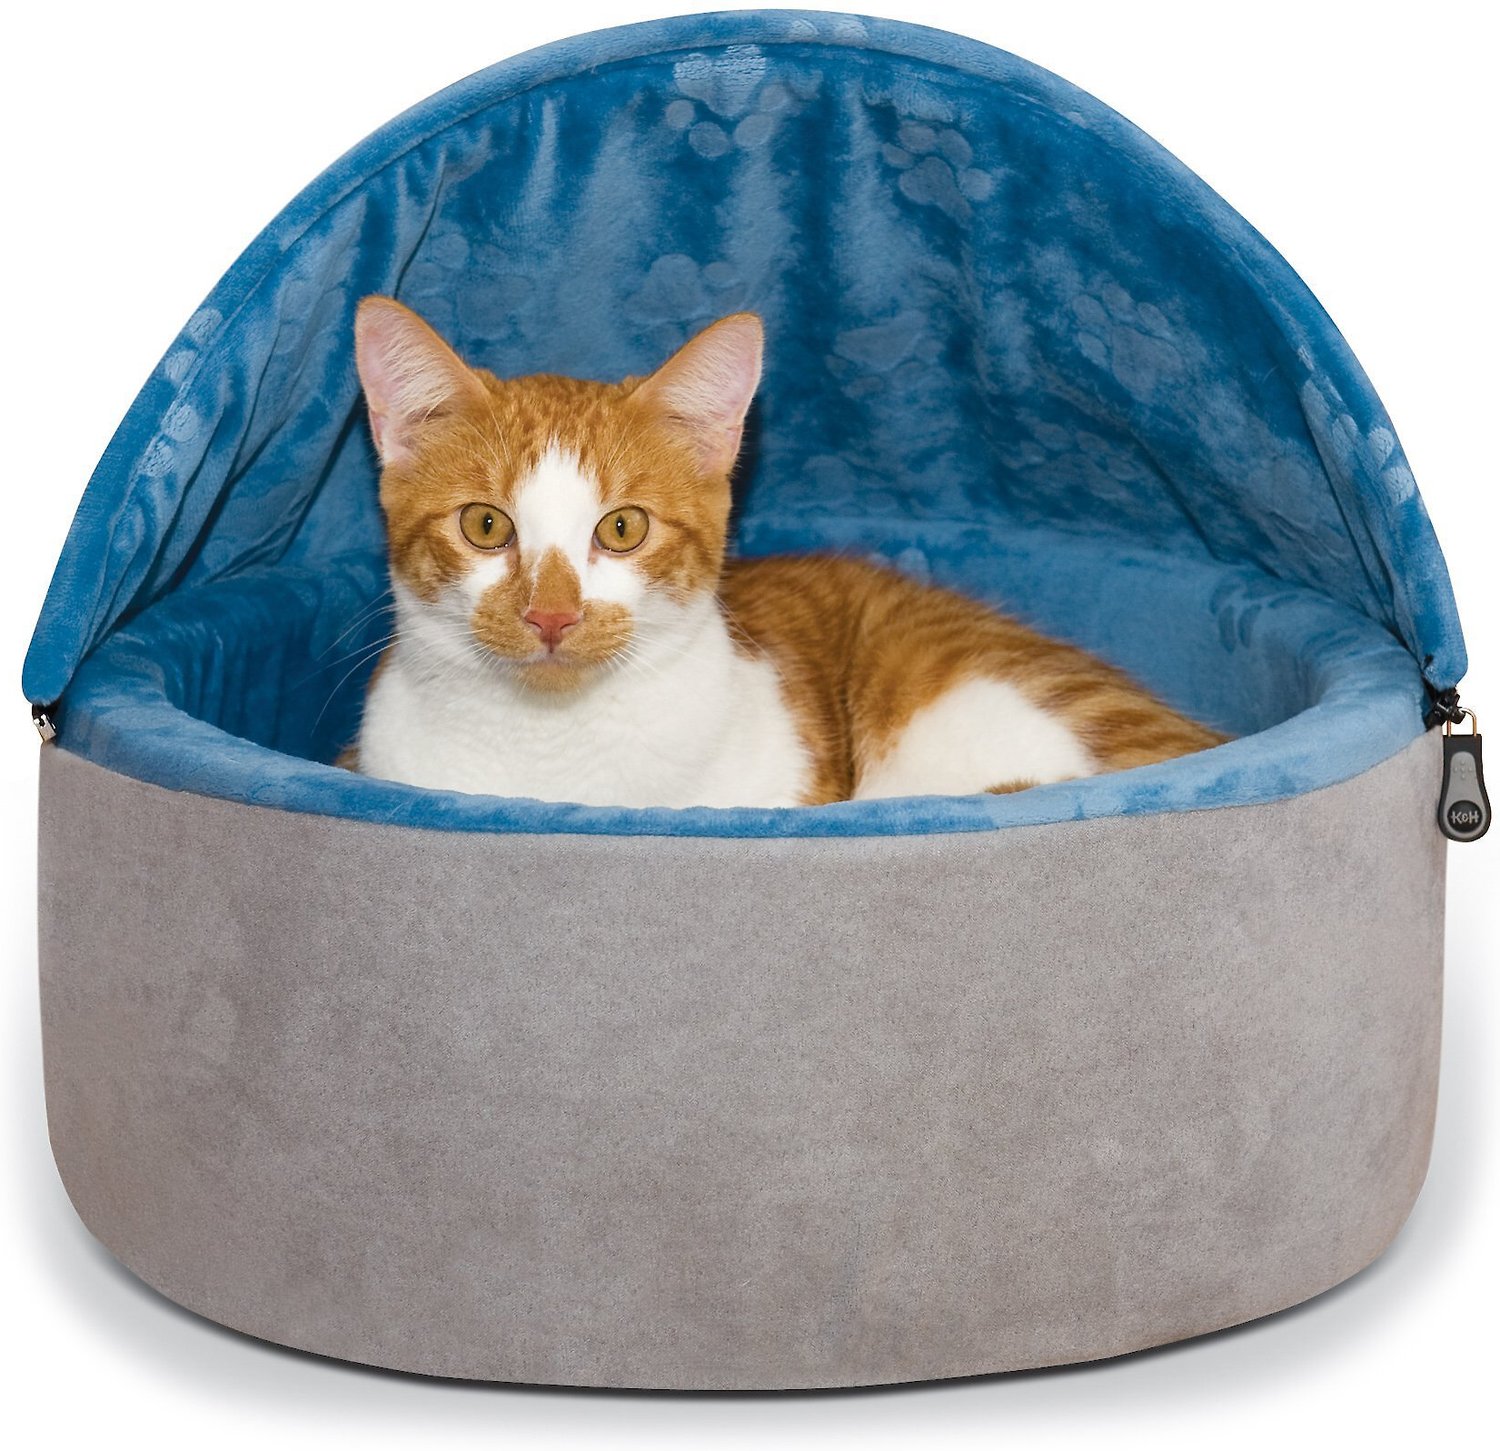 K amp H Pet Products Self Warming Hooded Cat Bed Blue Gray Small Chewy com